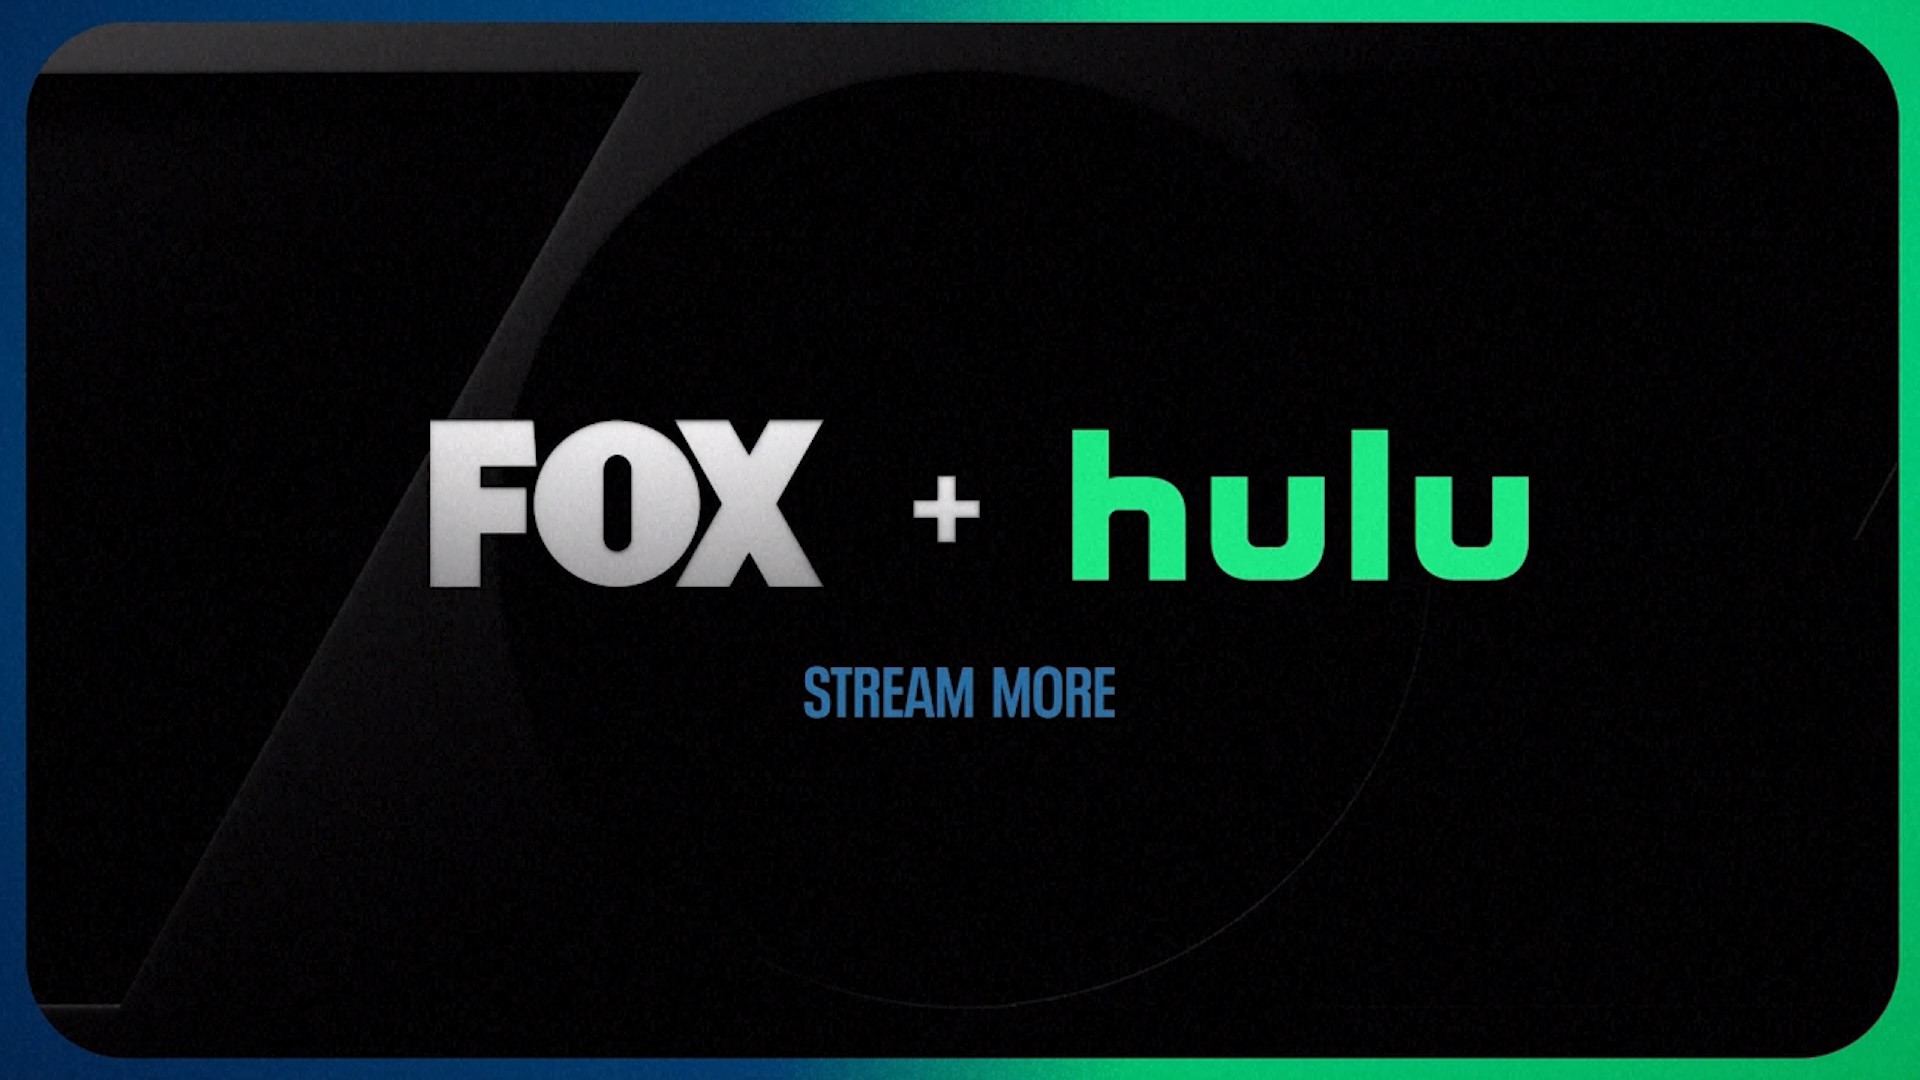 Catch up on your favorite FOX shows with Hulu